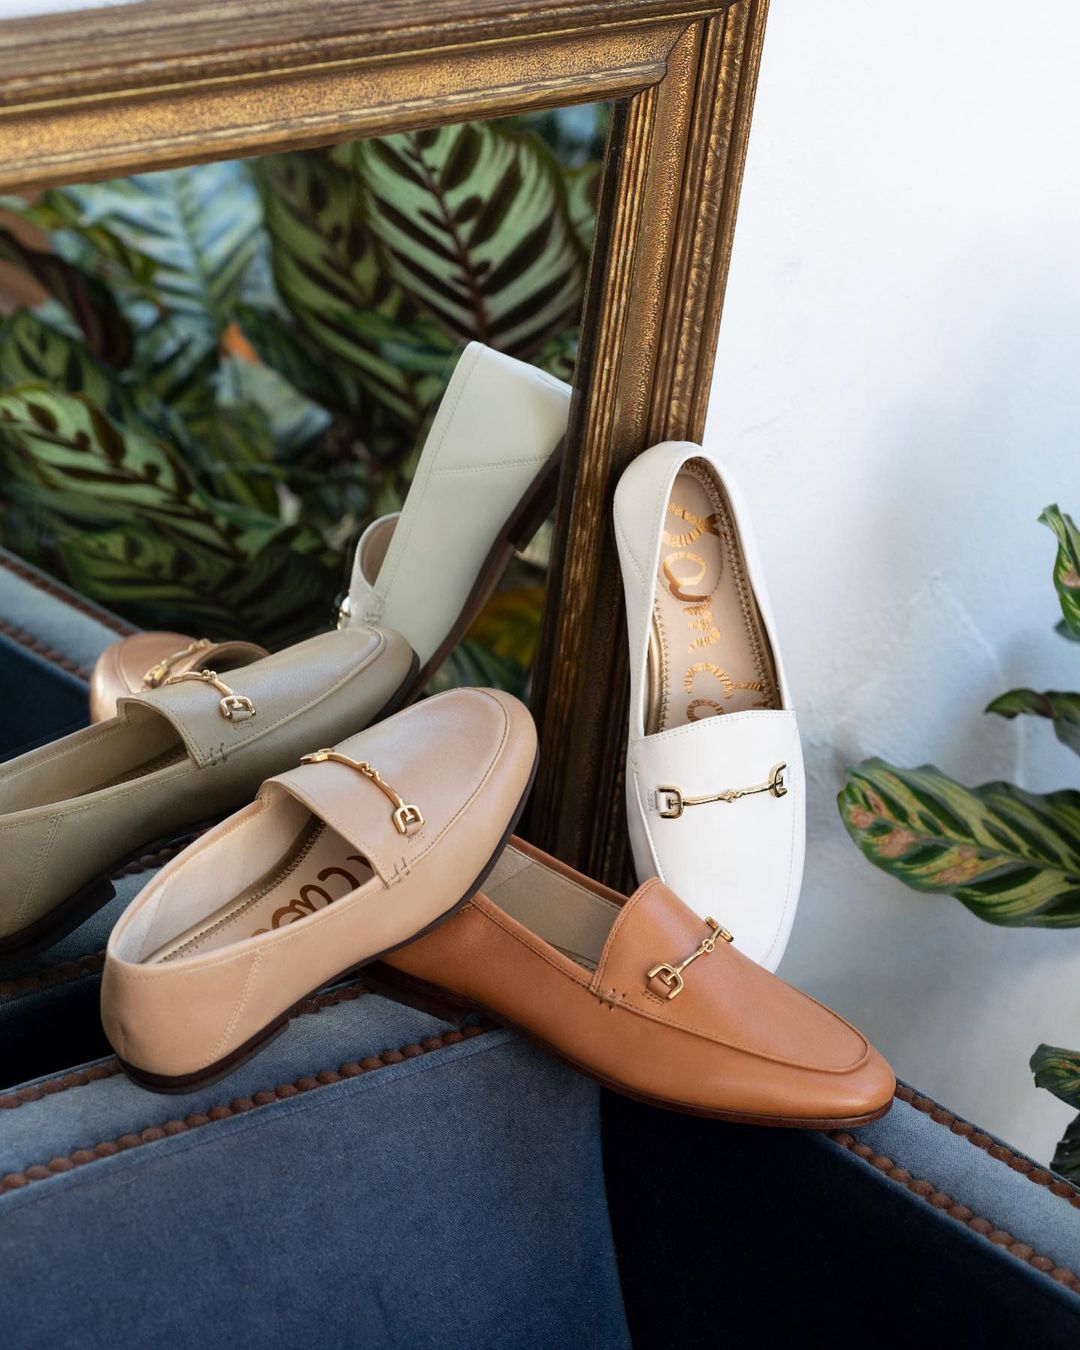 lifestyle imgae of sam edelman loafers in beige, brown and white.